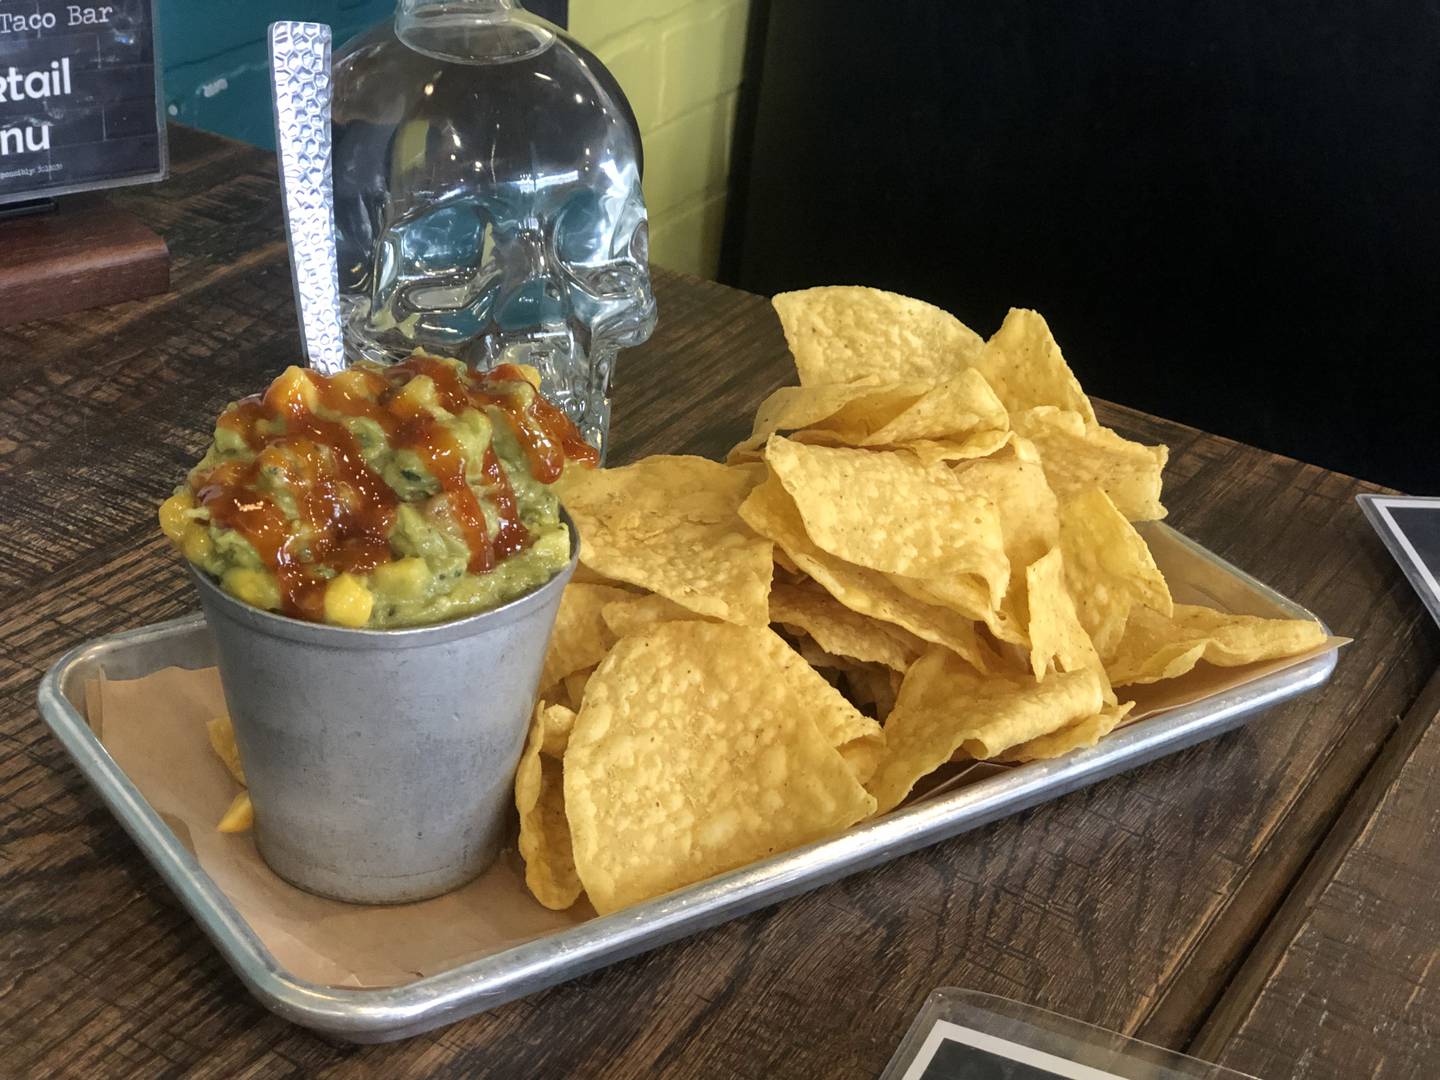 Cantina 52 offers a number of takes on guacamole, including Mango Madness, which we ordered.